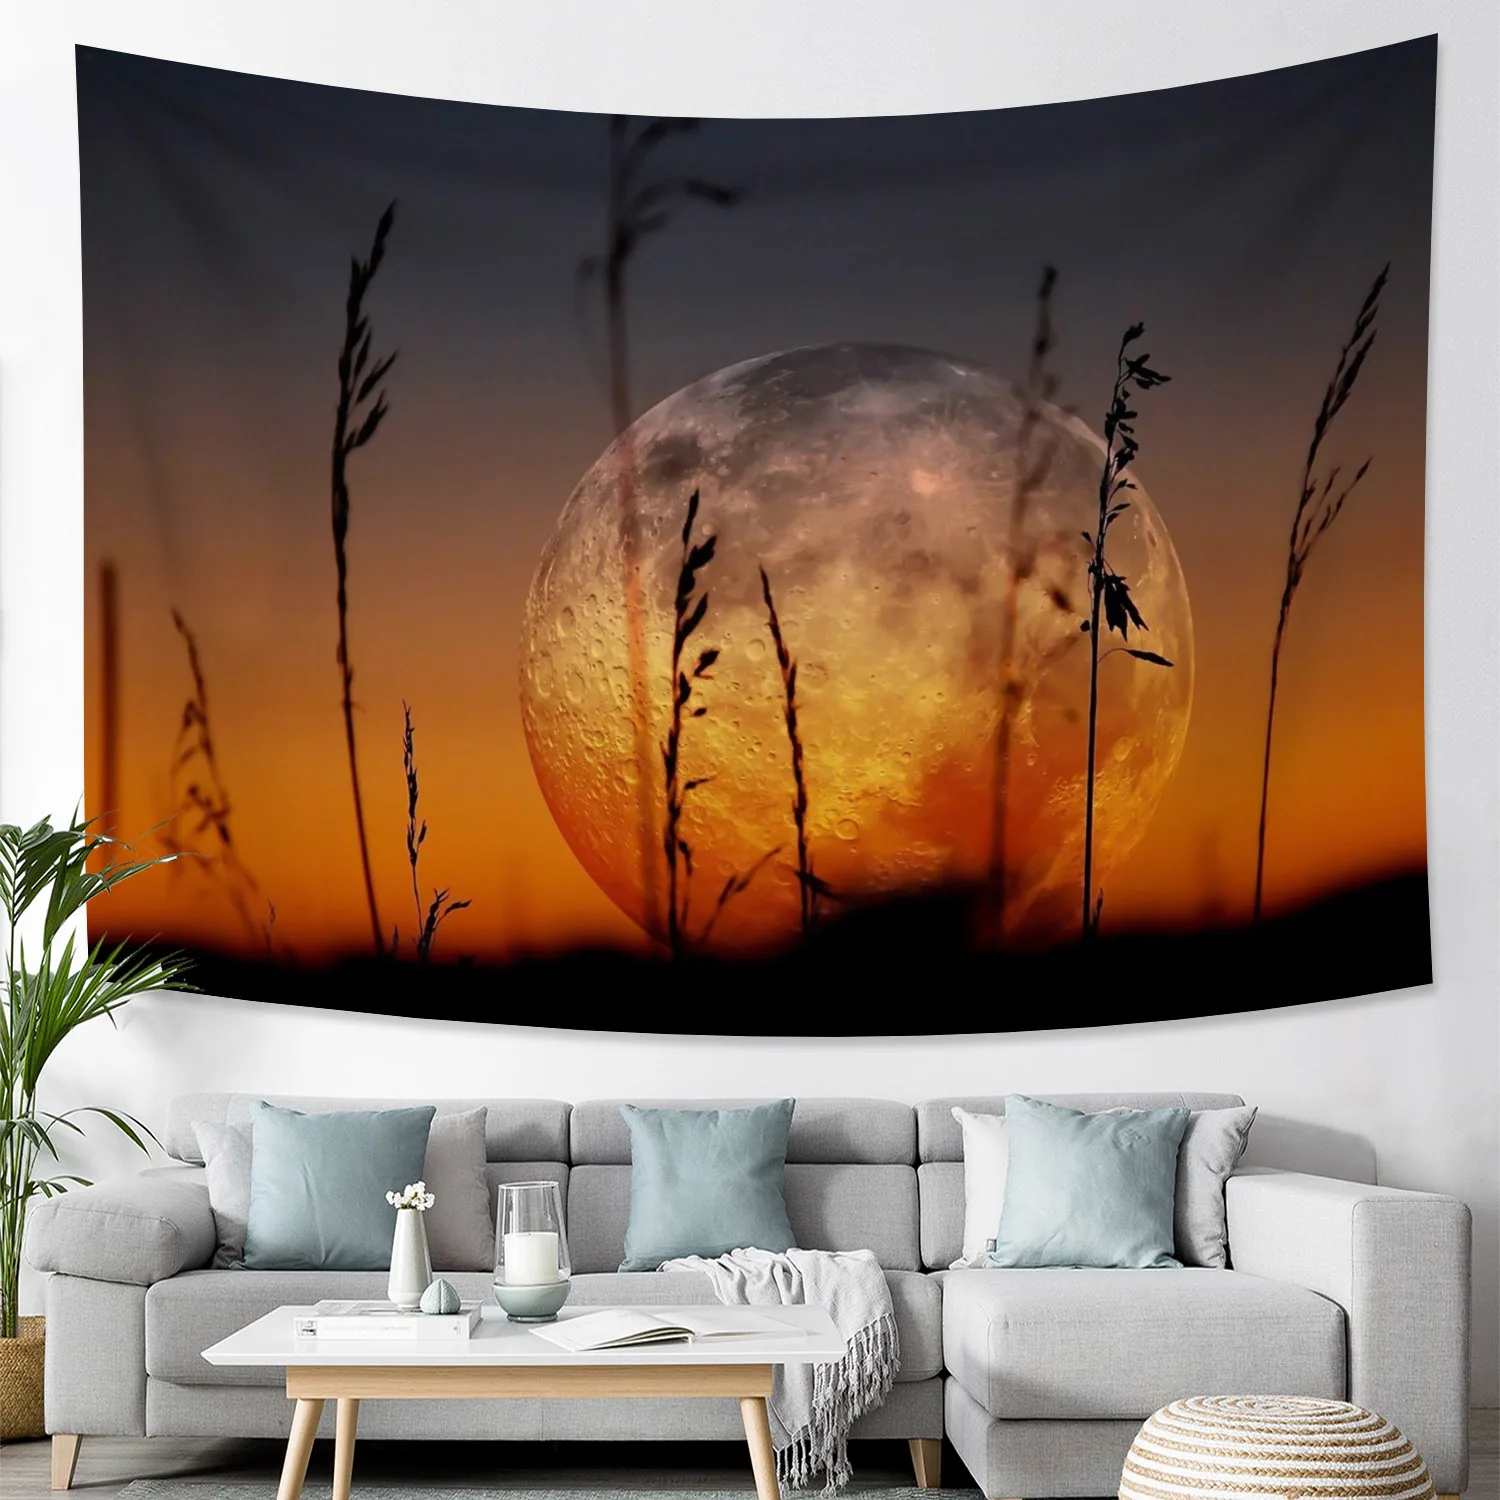 

FBH Starry Sky Landscape Tapestry Moon Large Scenery Wall Hanging Aesthetics Living Room Background Bedroom Boho Home Decor